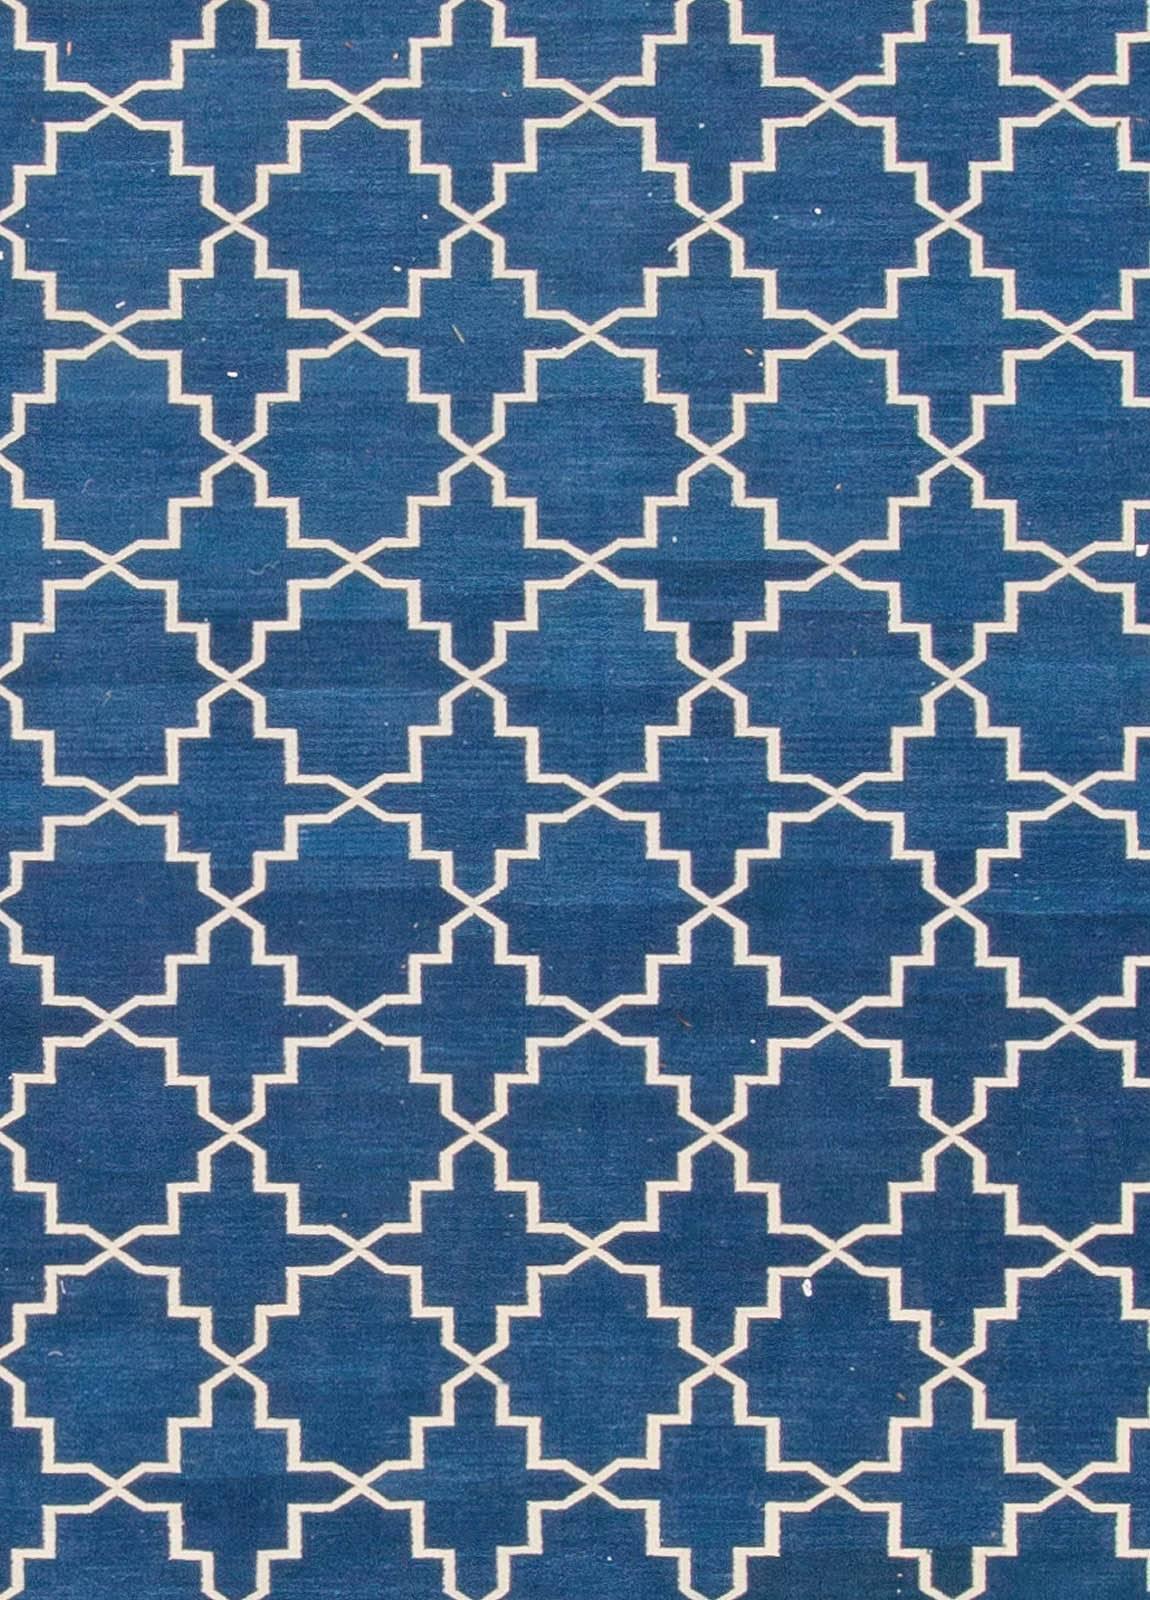 Contemporary Indian Dhurrie blue and white handmade rug by Doris Leslie Blau
Size: 13'0